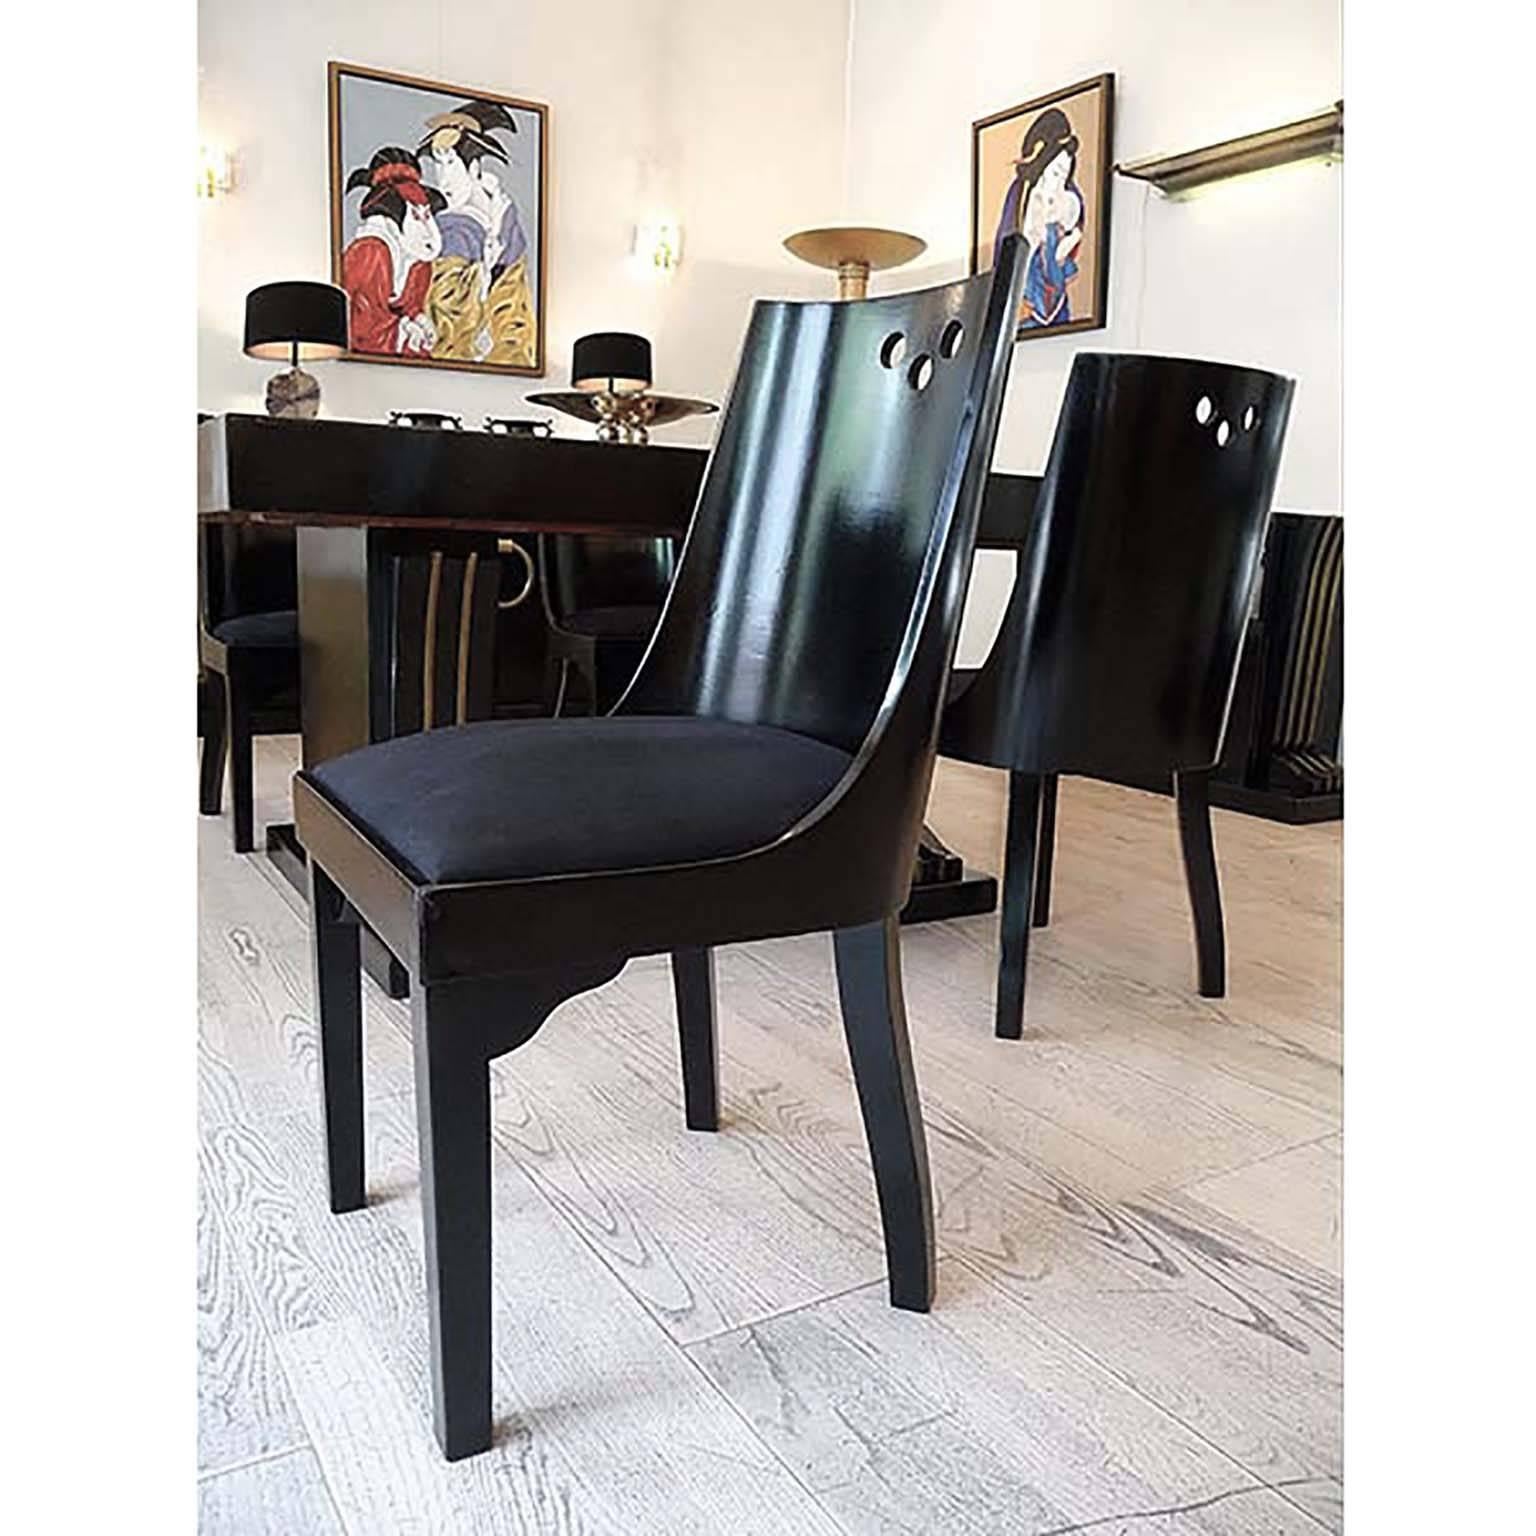 Lacquered Art Deco Jean Pascaud Gondola Dining Chairs, France, circa 1933 For Sale